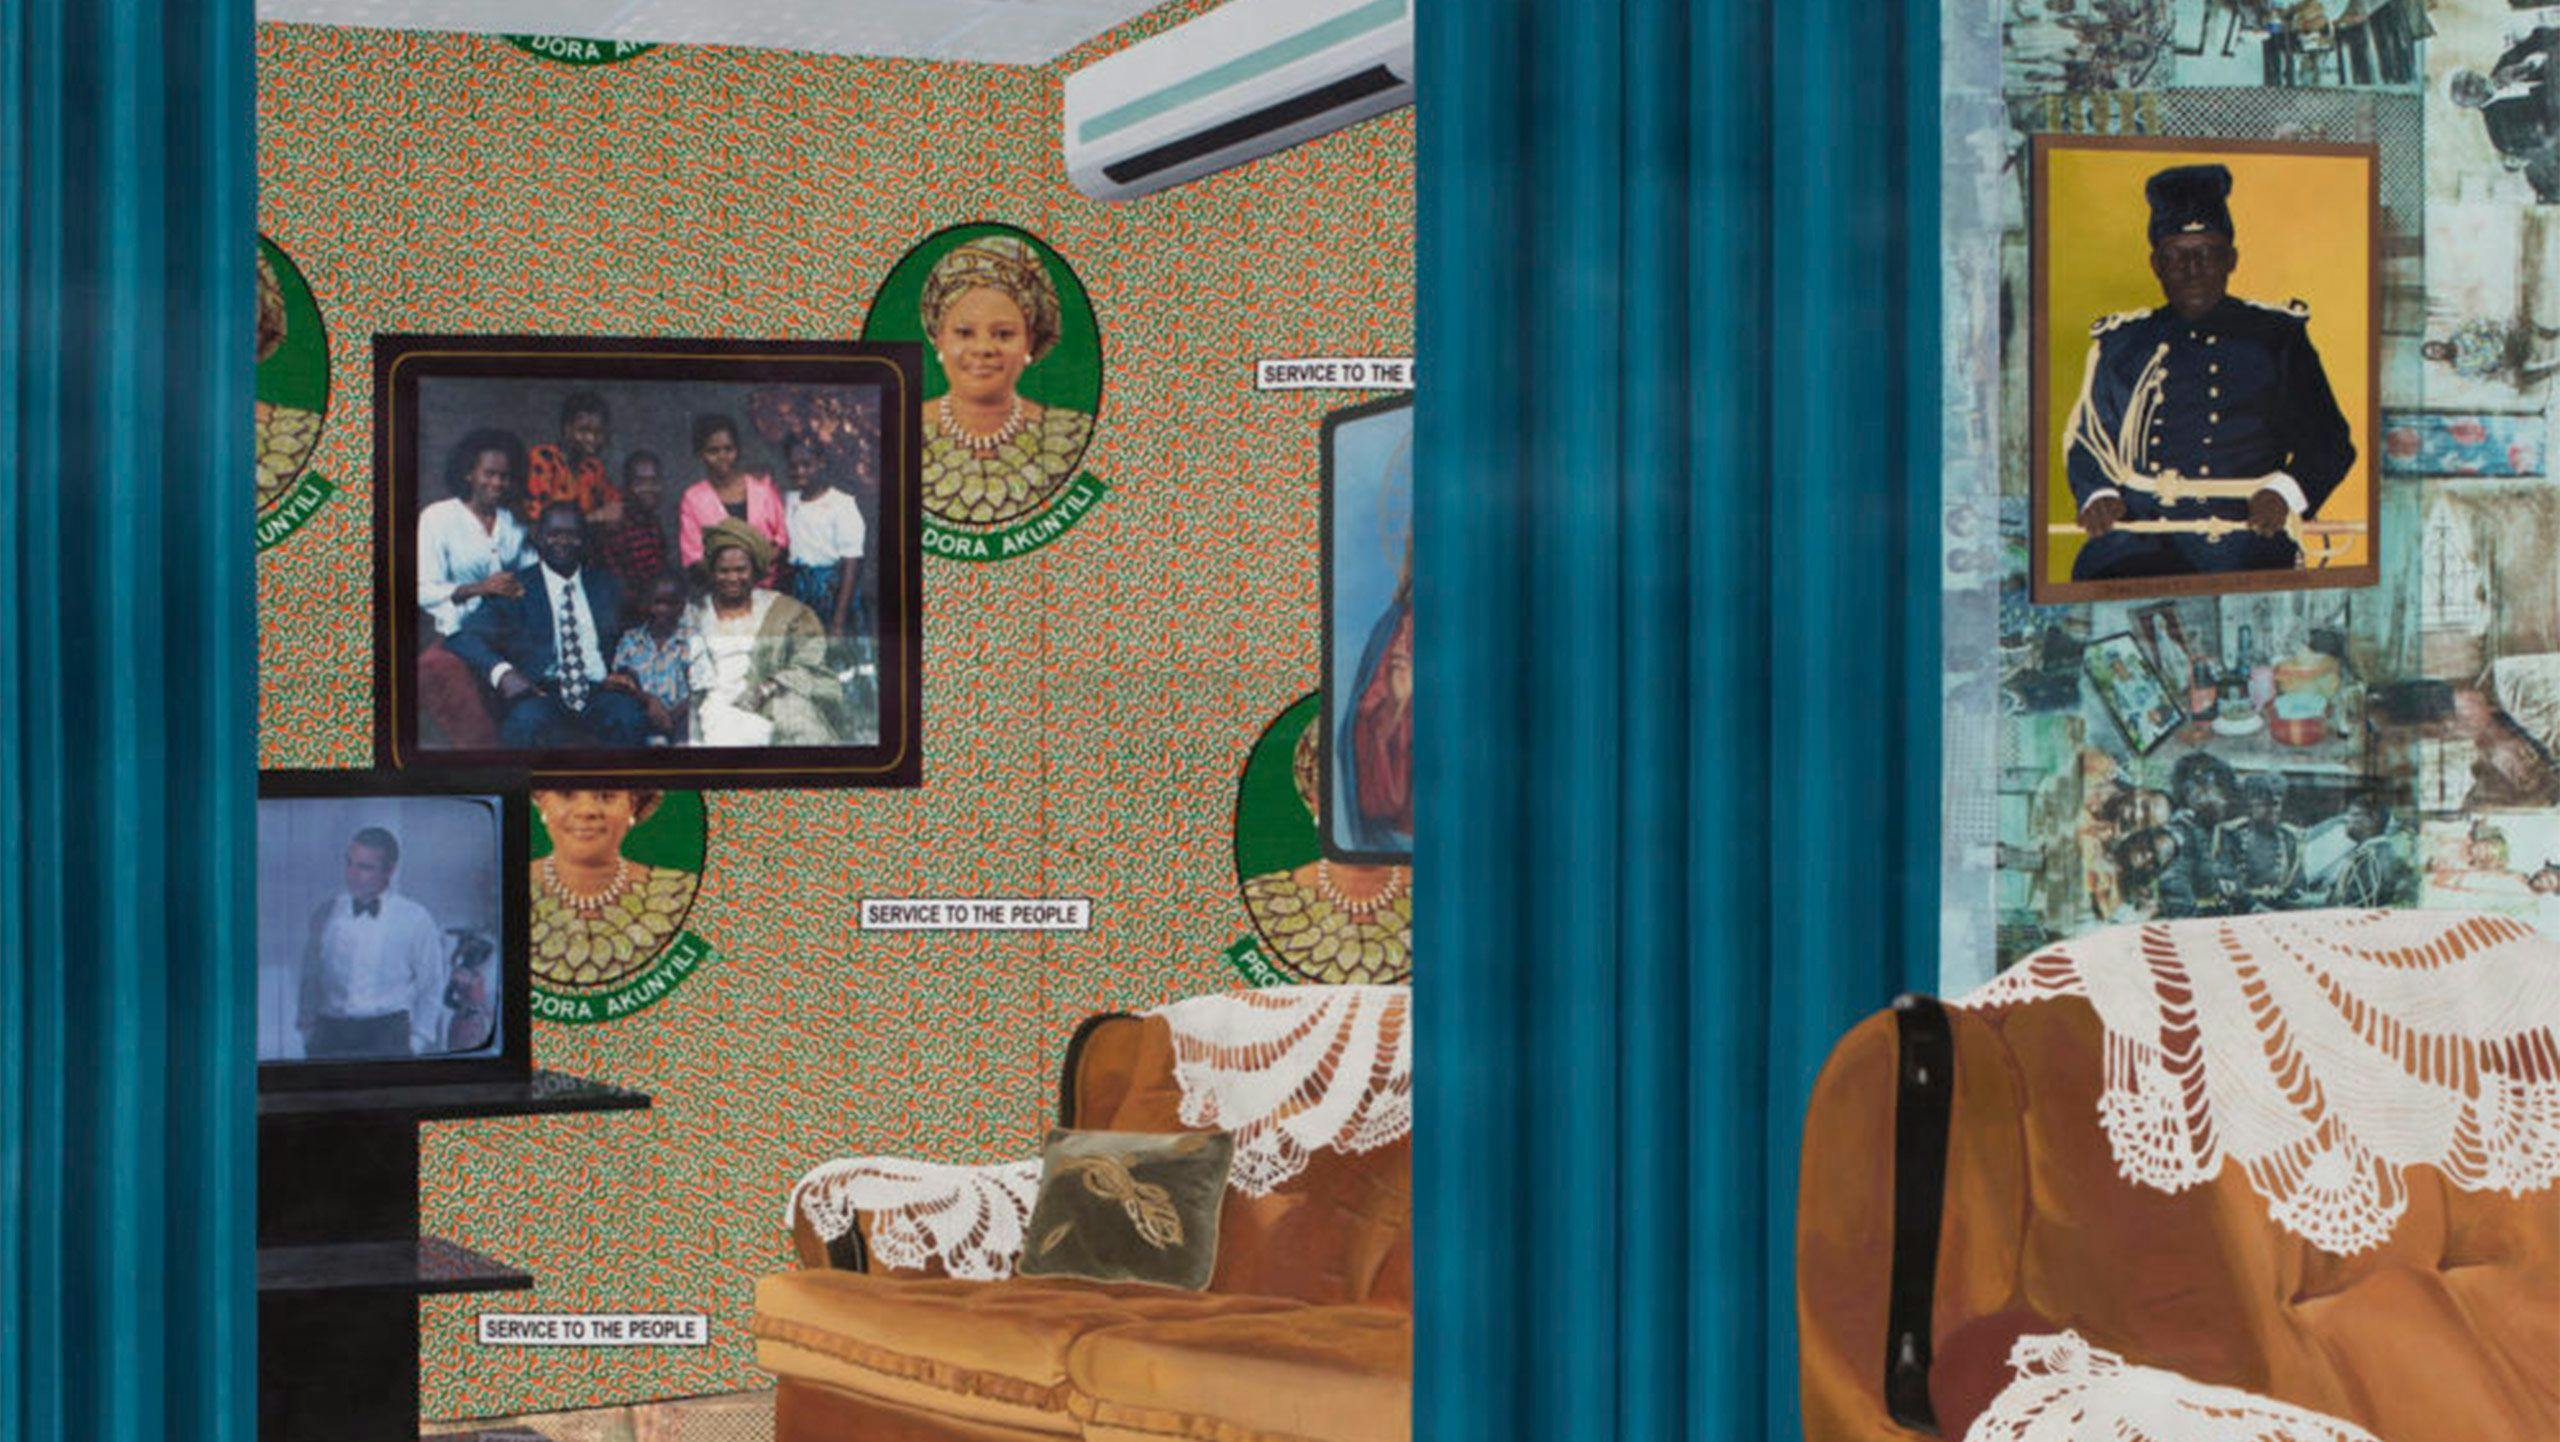 An artwork by Njideka Akunyili Crosby, titled Home: As You See Me, dated 2017. Photo by Brian Forrest